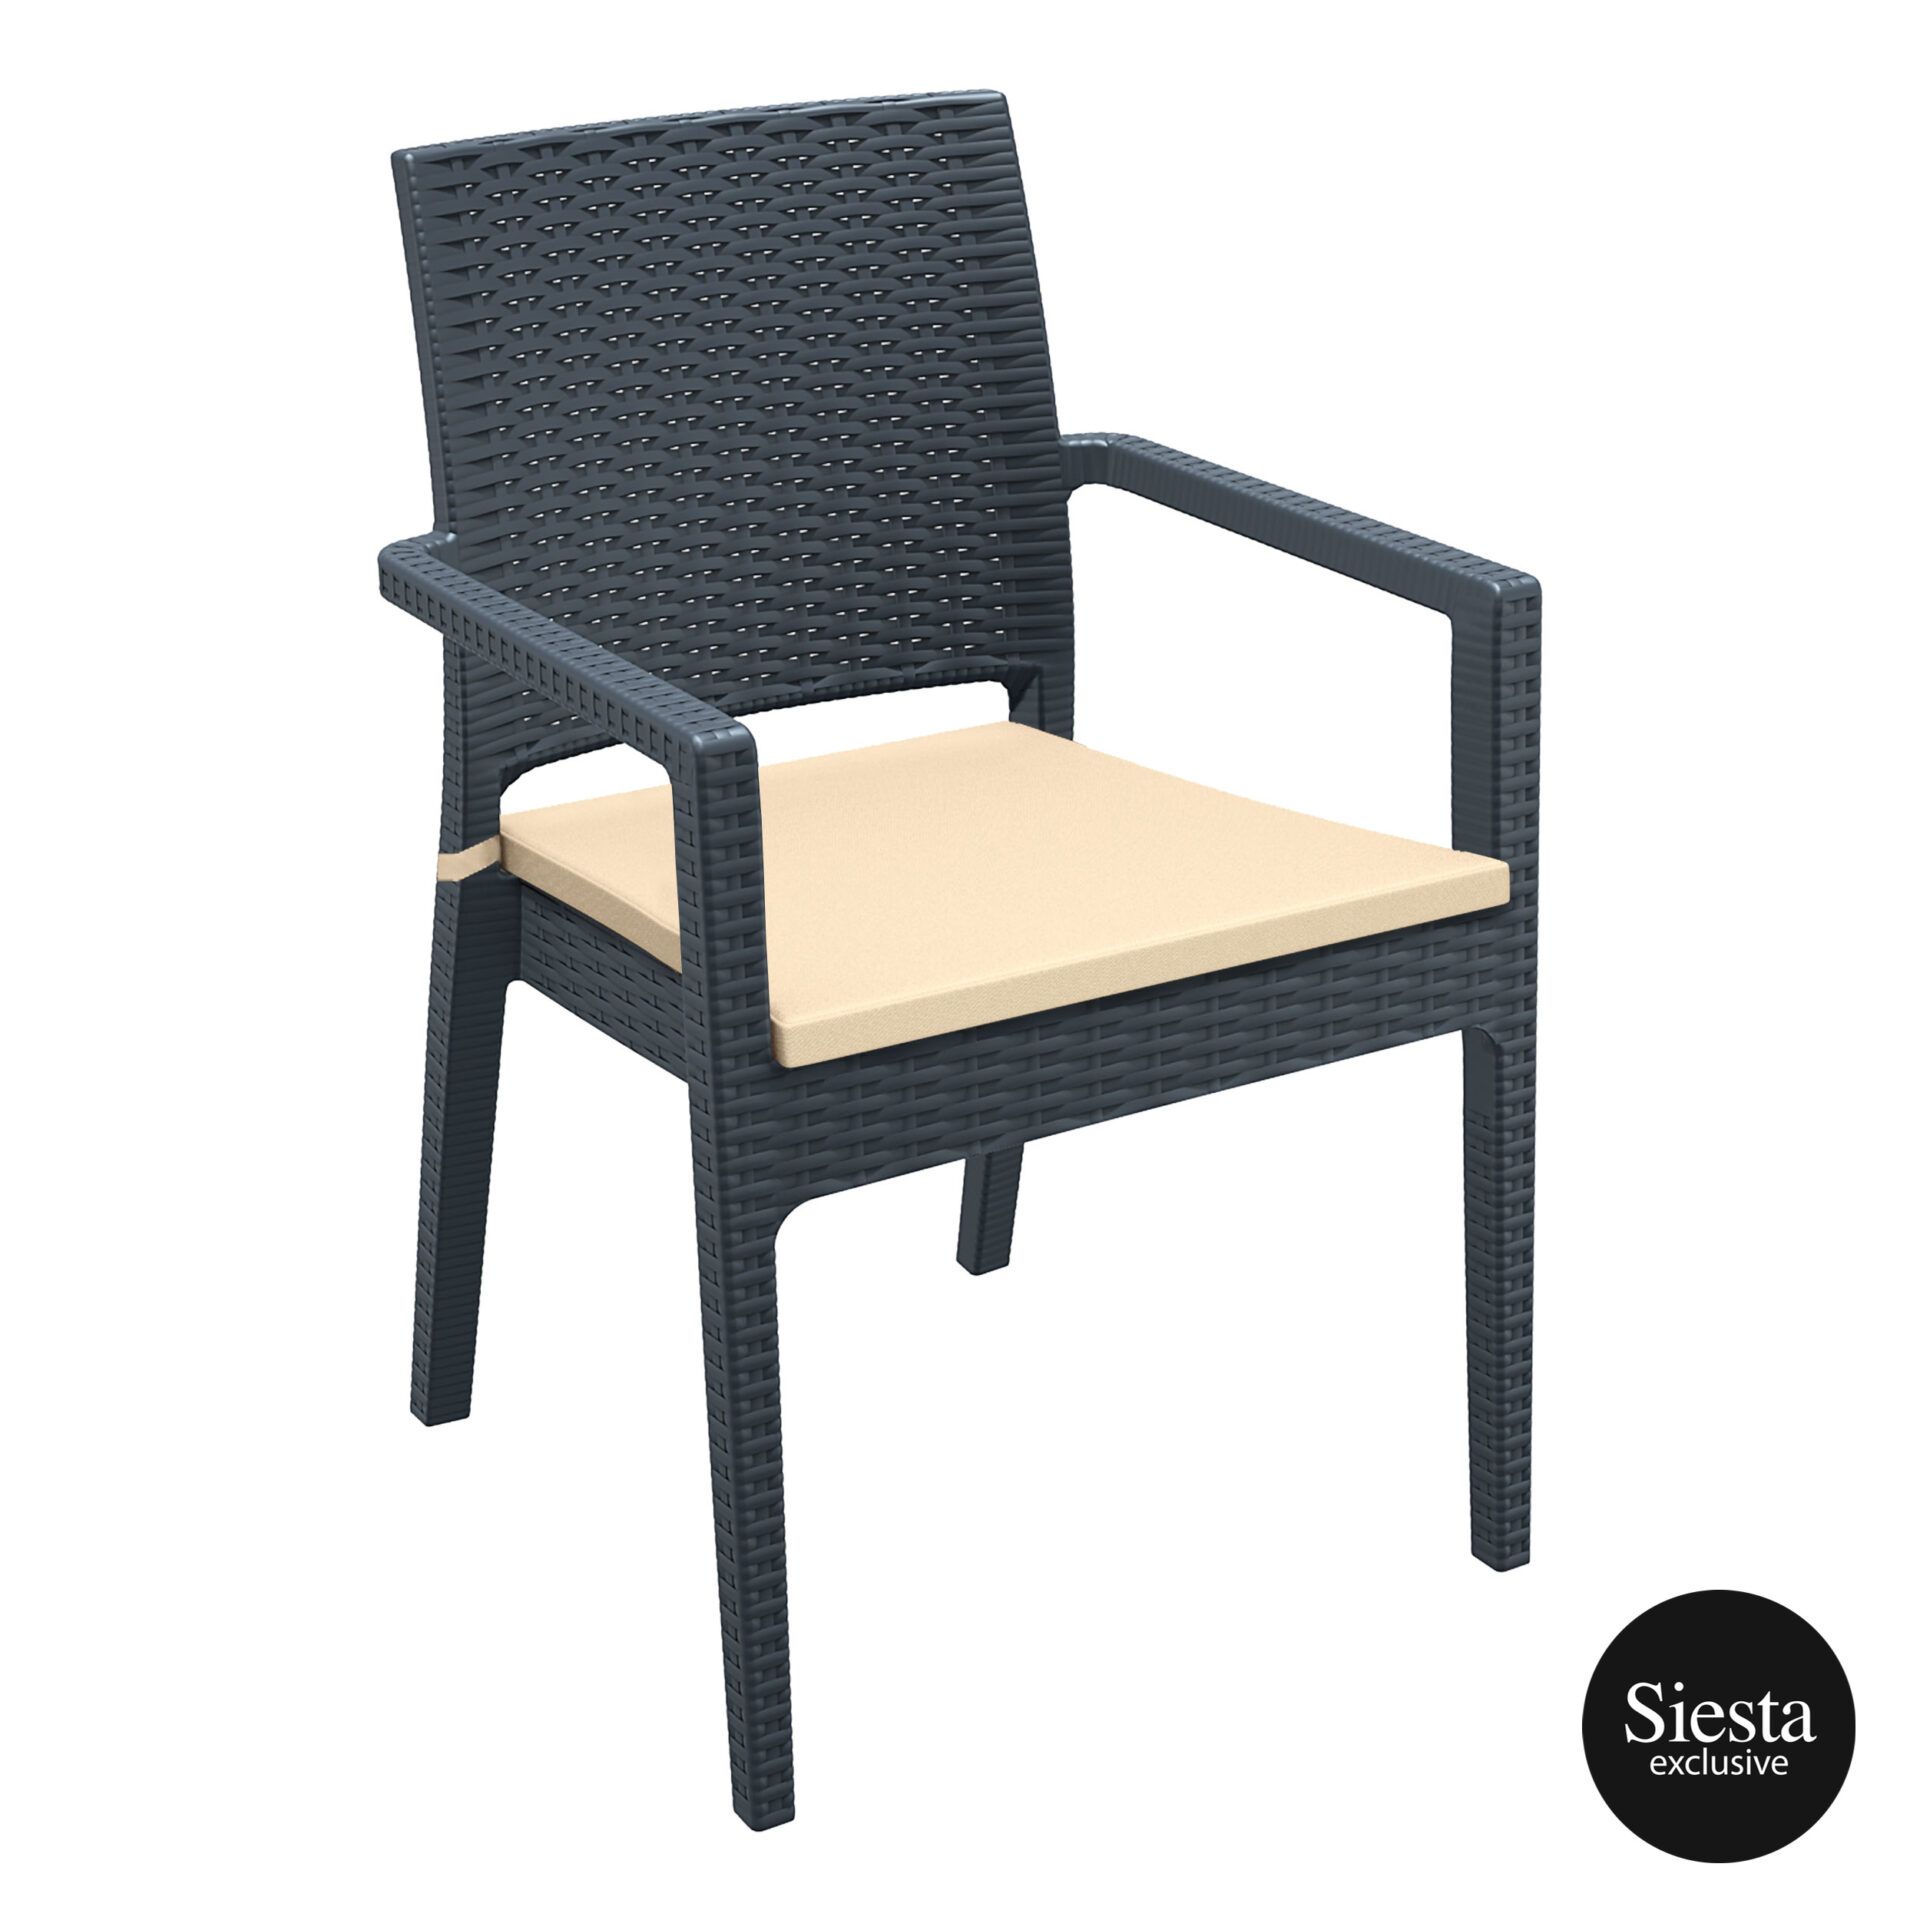 Ibiza Armchair - Anthracite with Beige Cushion